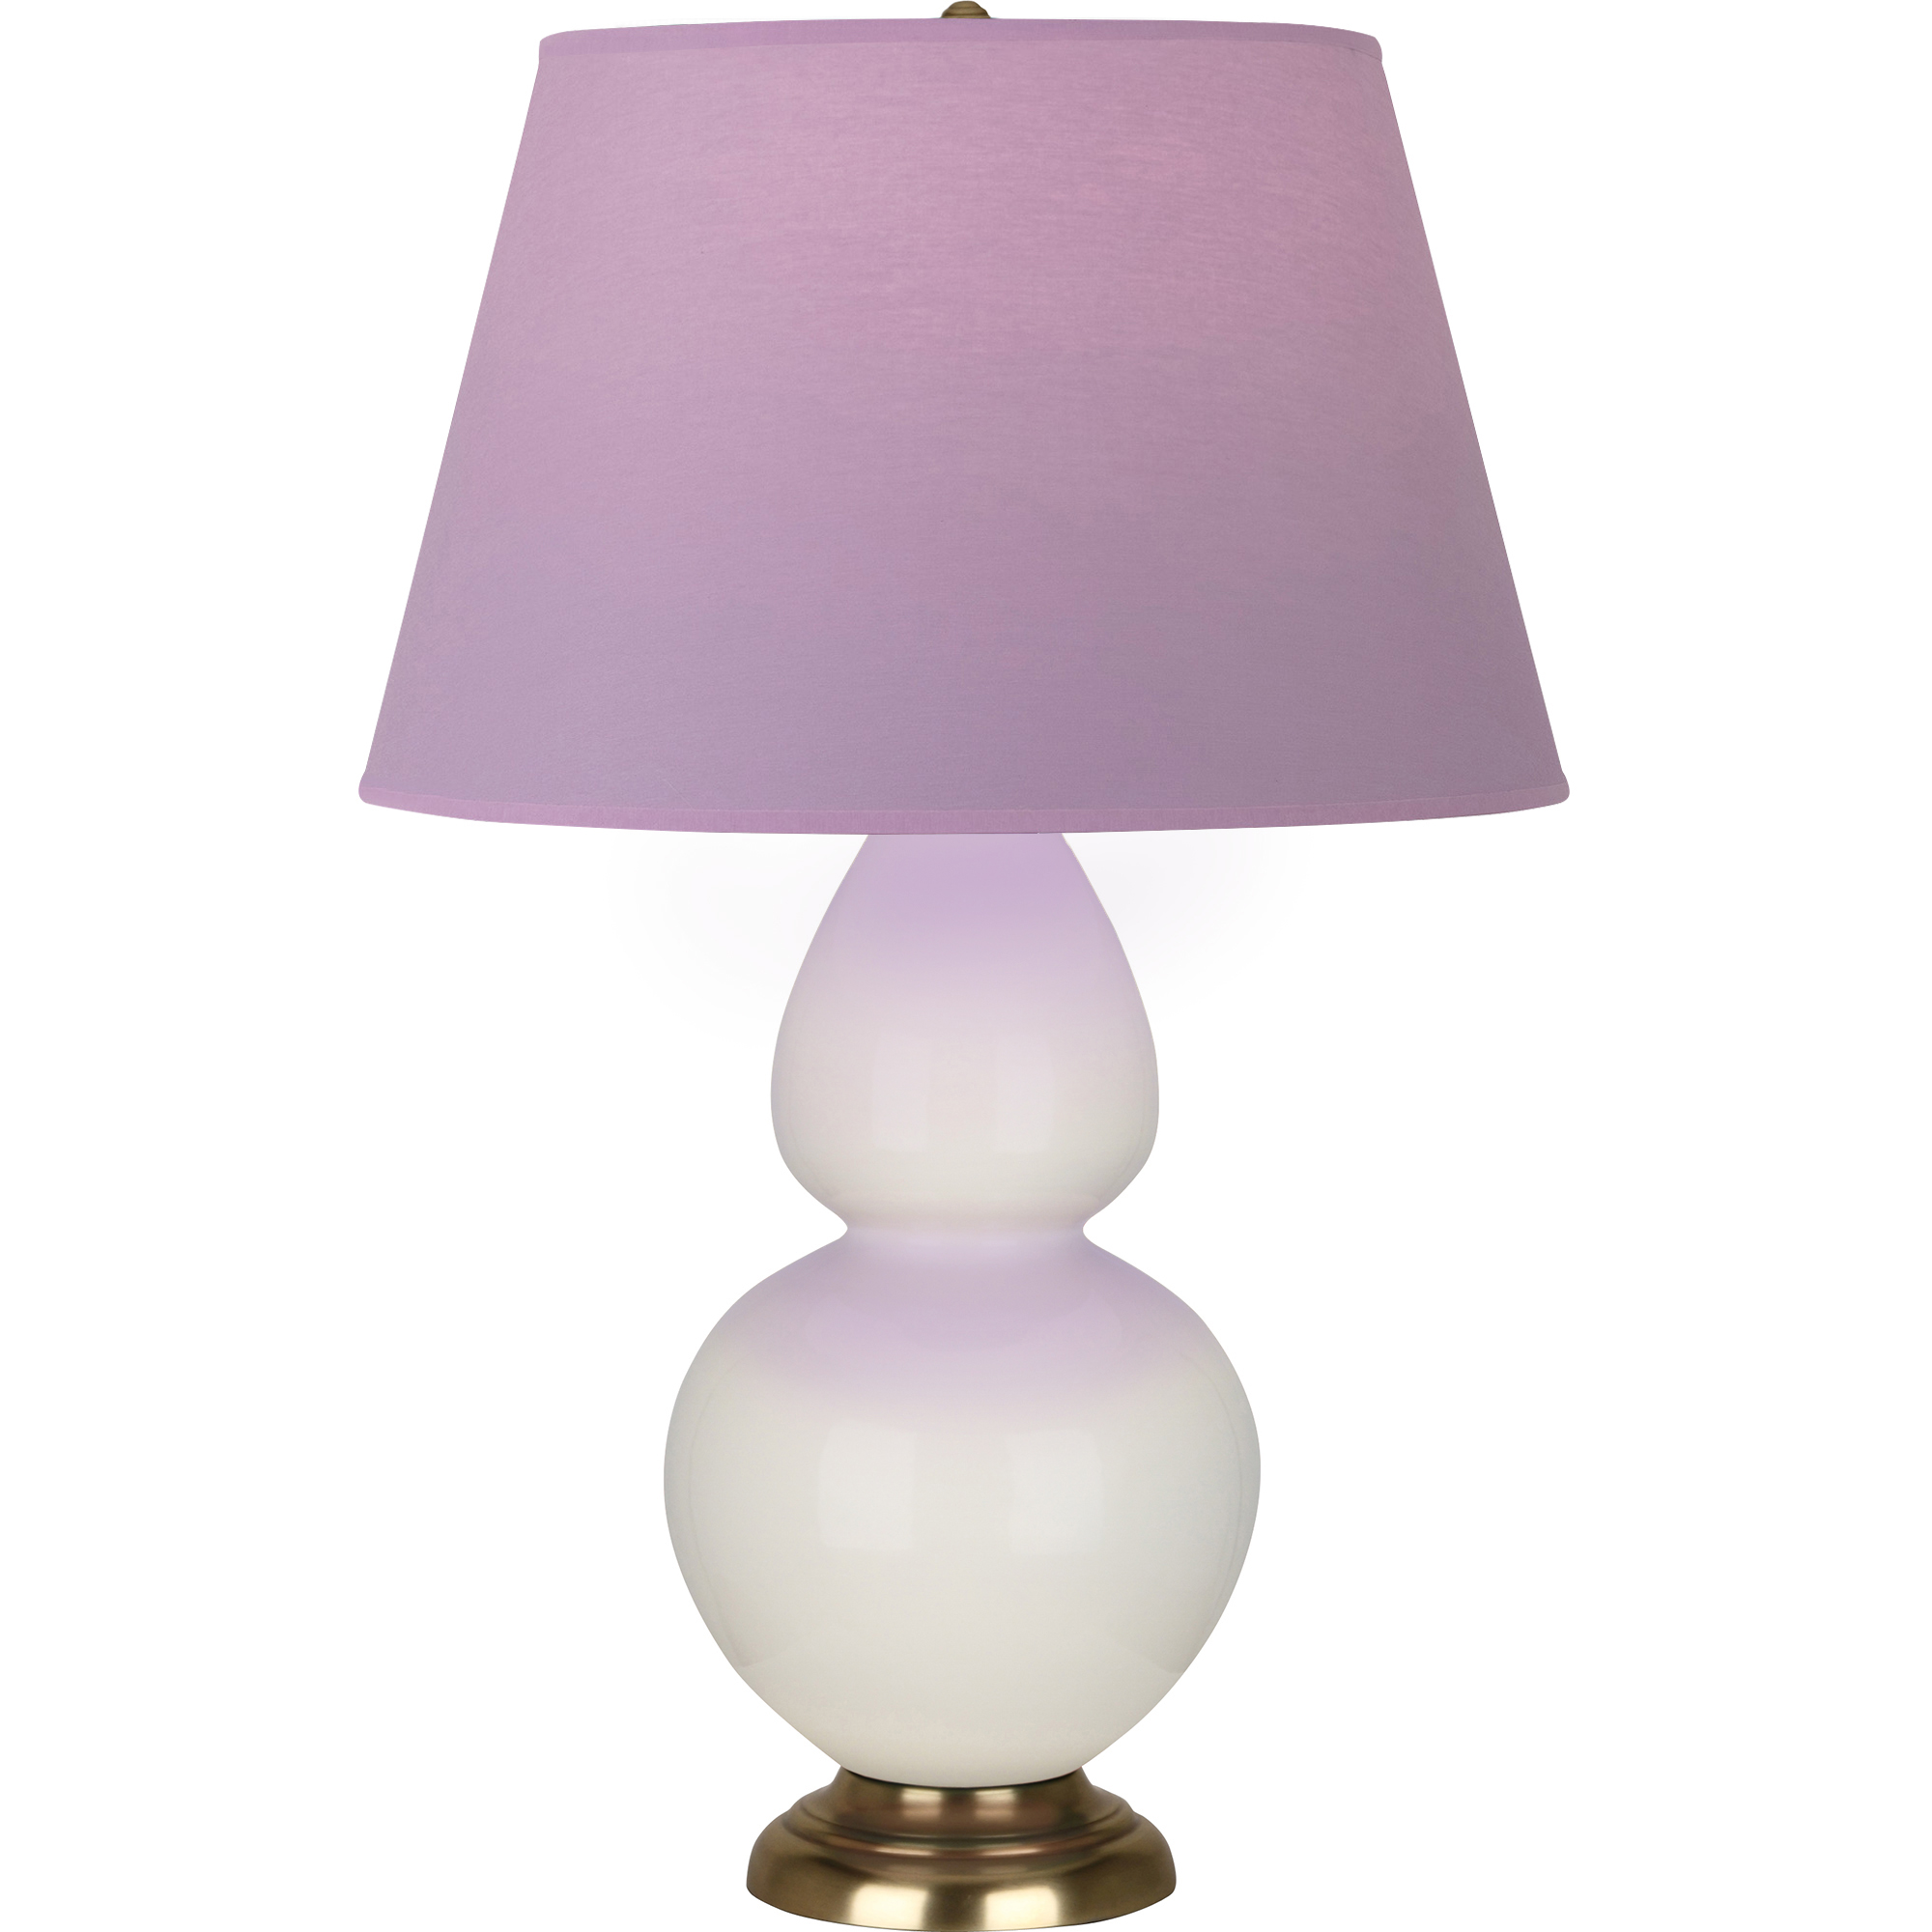 Double Gourd Table Lamp Style #1754L